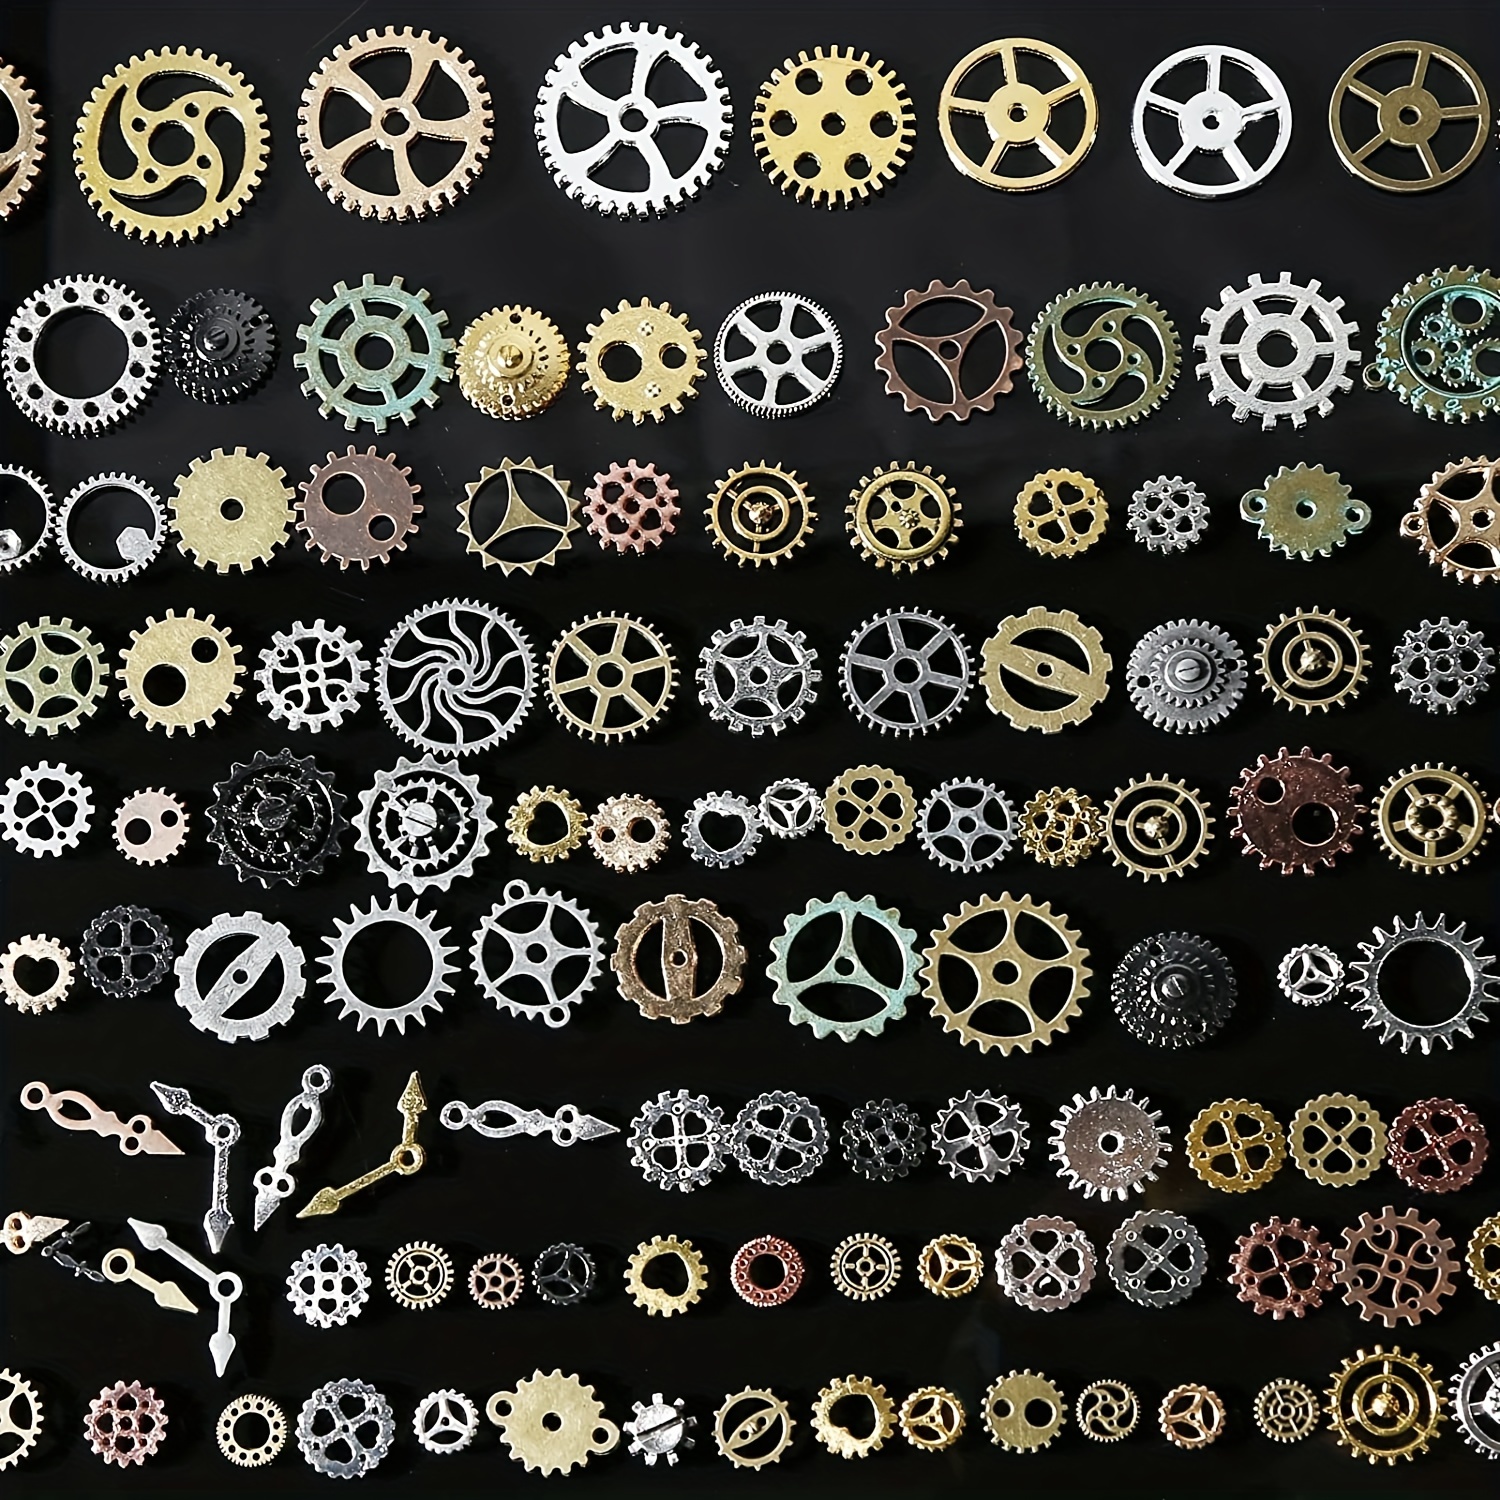 BIHRTC 100 Gram DIY Assorted Color Antique Metal Steampunk Gears Charms  Pendant Clock Watch Wheel Gear for Crafting Jewelry Making Accessory  Assorted Color 2